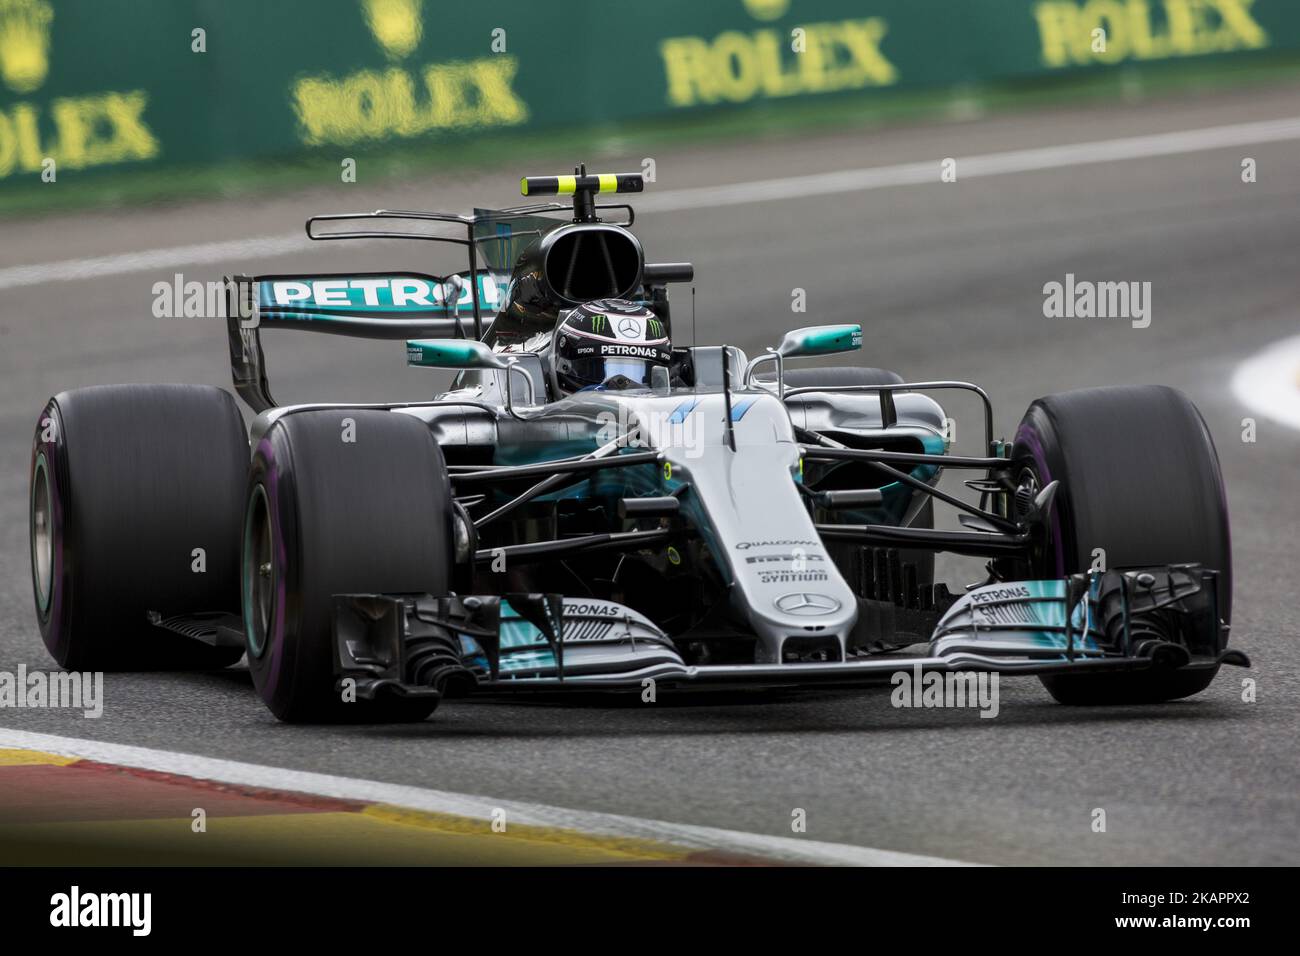 77 BOTTAS Valtteri from Finland of team Mercedes GP during the Formula One Belgian Grand Prix at Circuit de Spa-Francorchamps on August 25, 2017 in Spa, Belgium. (Photo by Xavier Bonilla/NurPhoto) Stock Photo